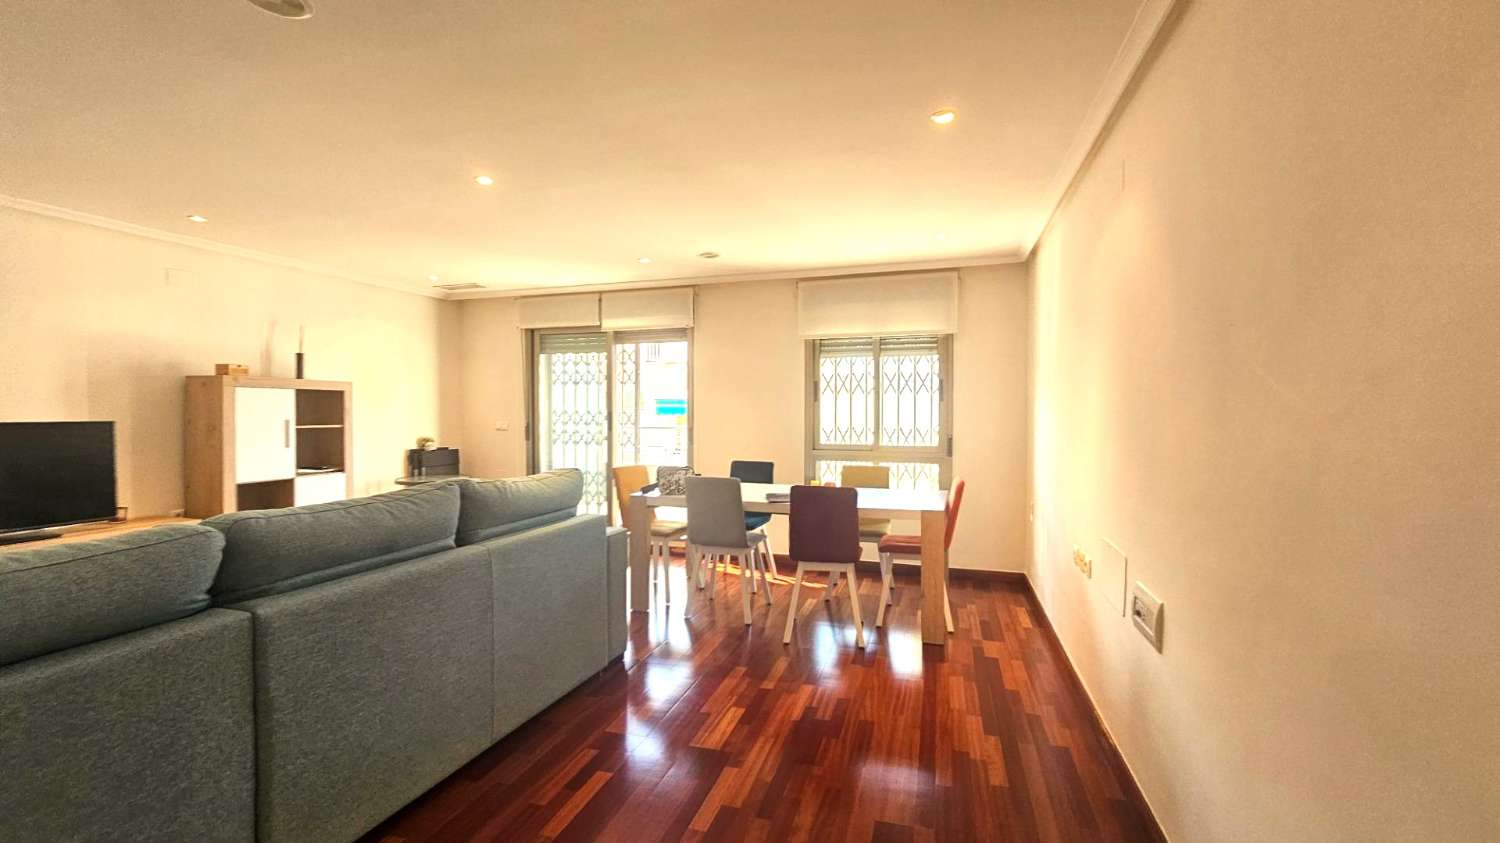 SPACIOUS AND MODERN PENTHOUSE IN THE HEART OF THE CITY CENTRE